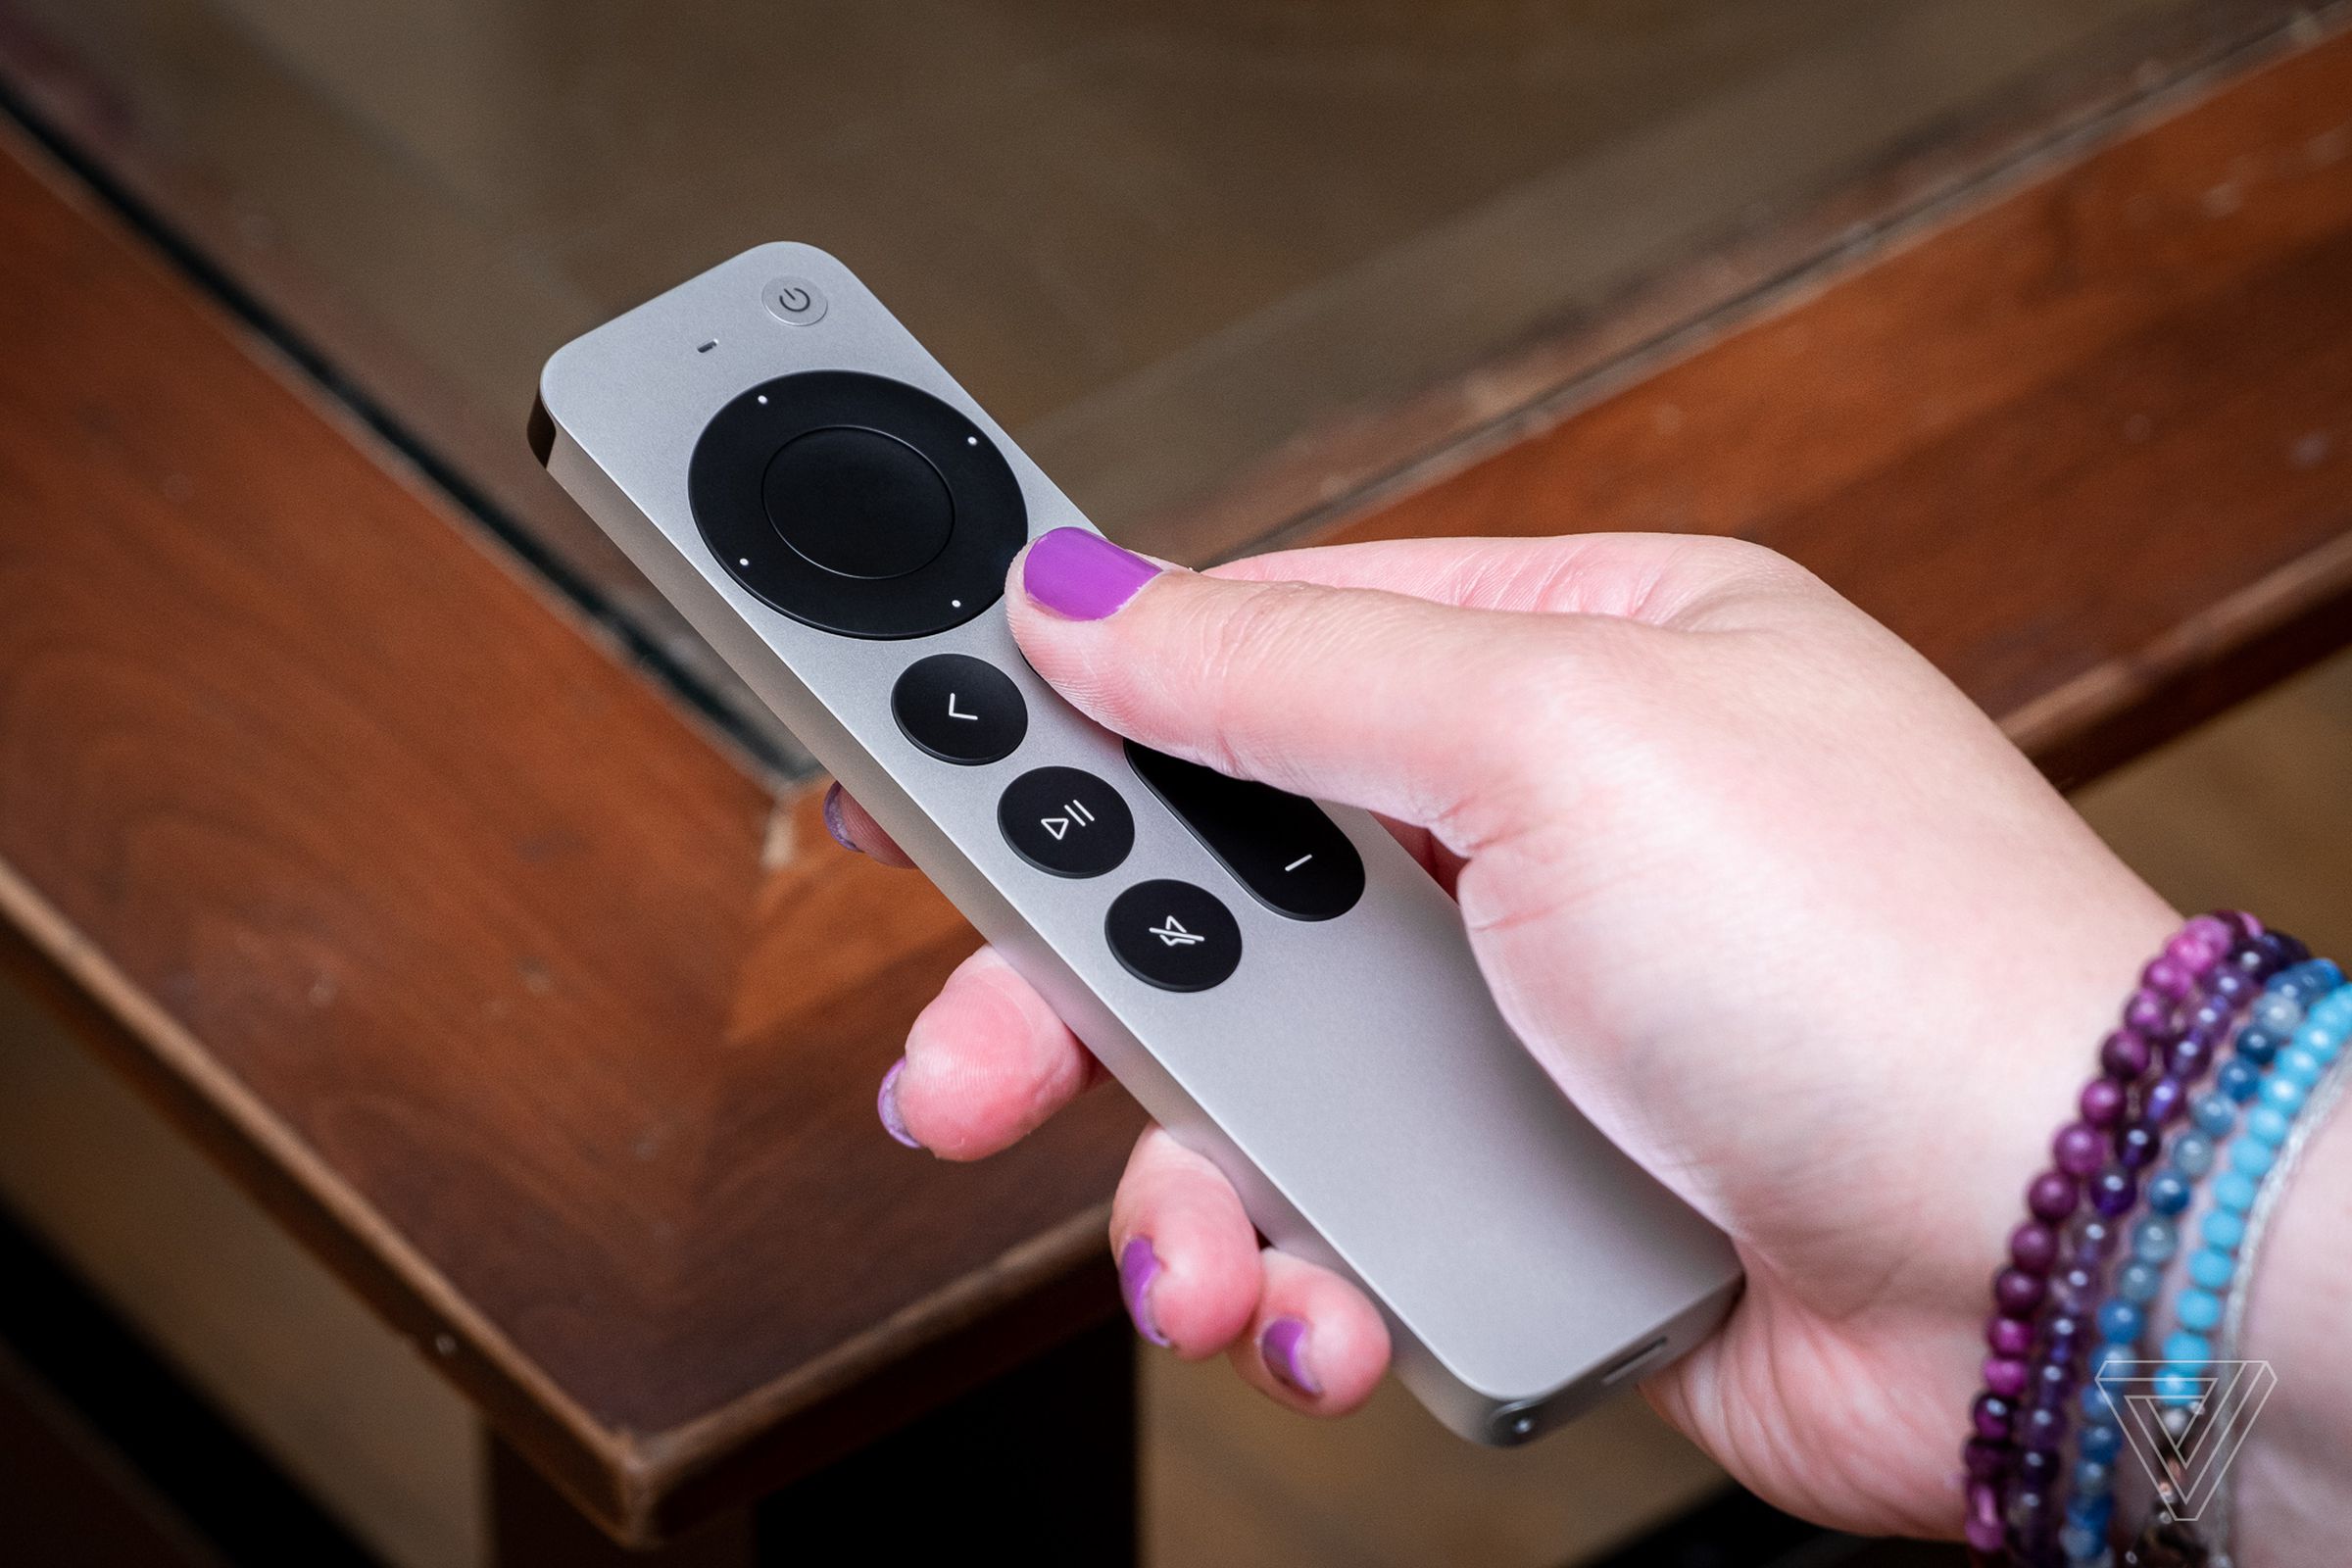 Apple has redesigned the Siri Remote, which is now larger and much easier to use.